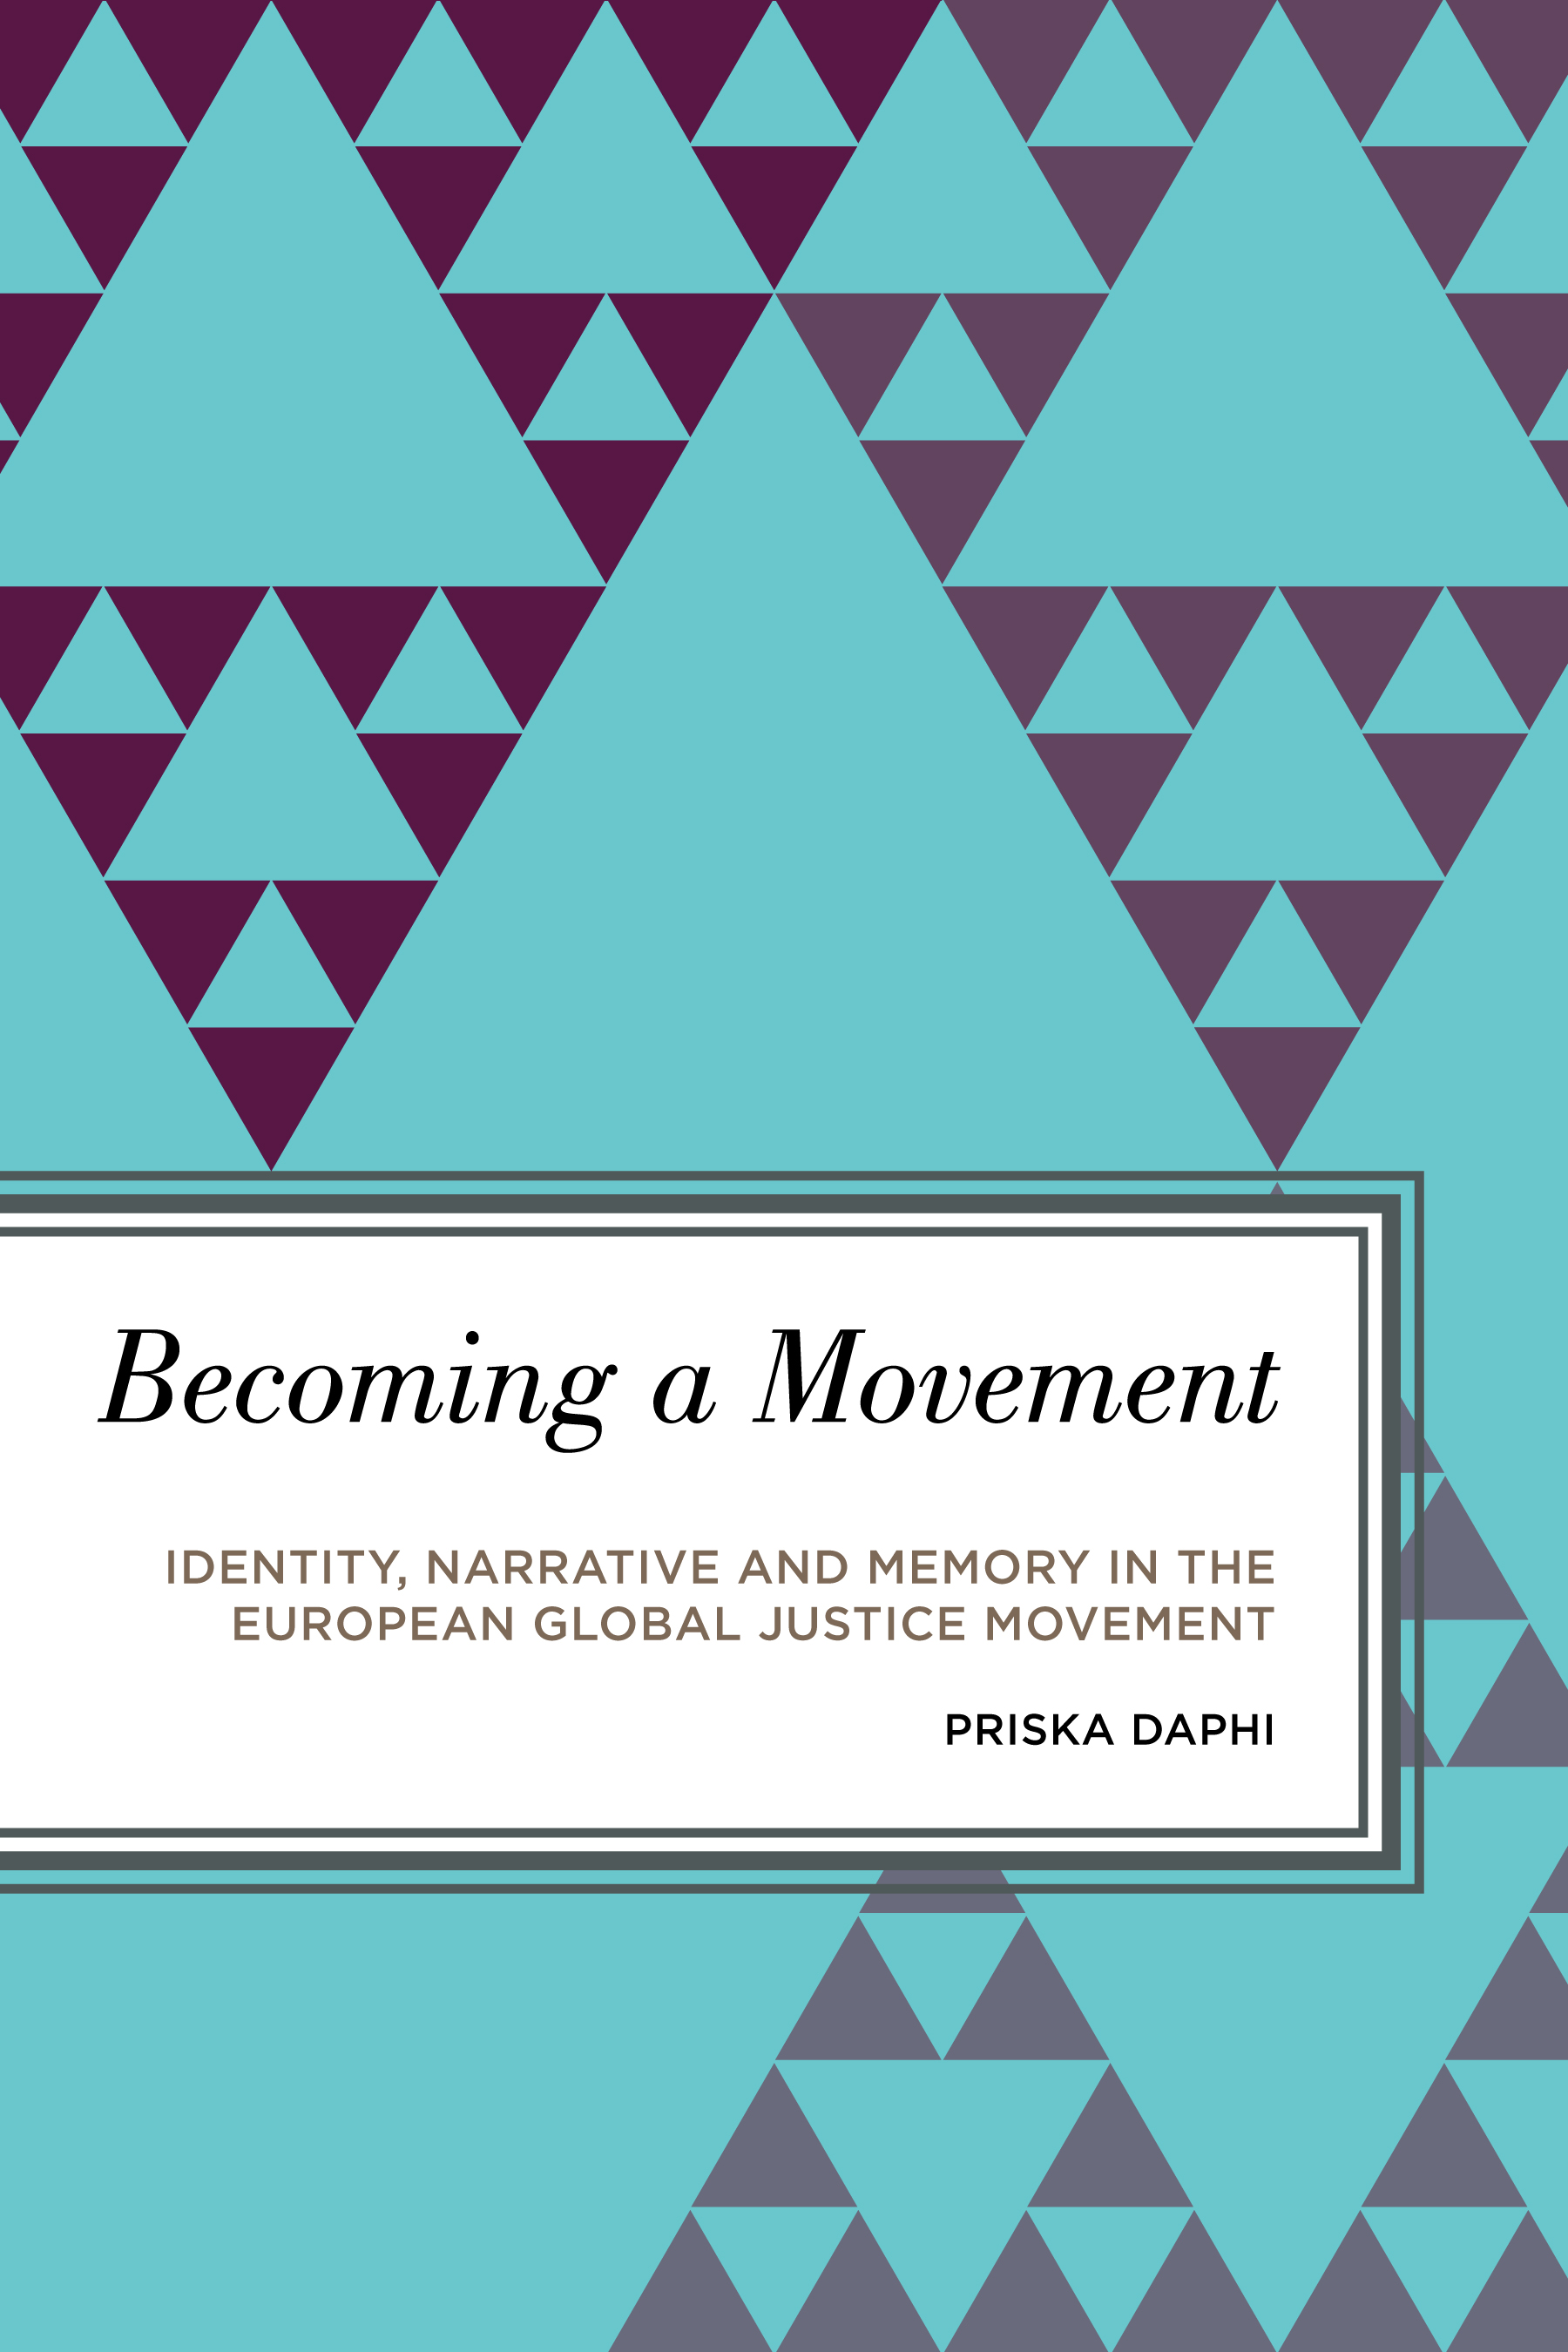 Becoming a Movement: Identity, Narrative and Memory in the European Global Justice Movement